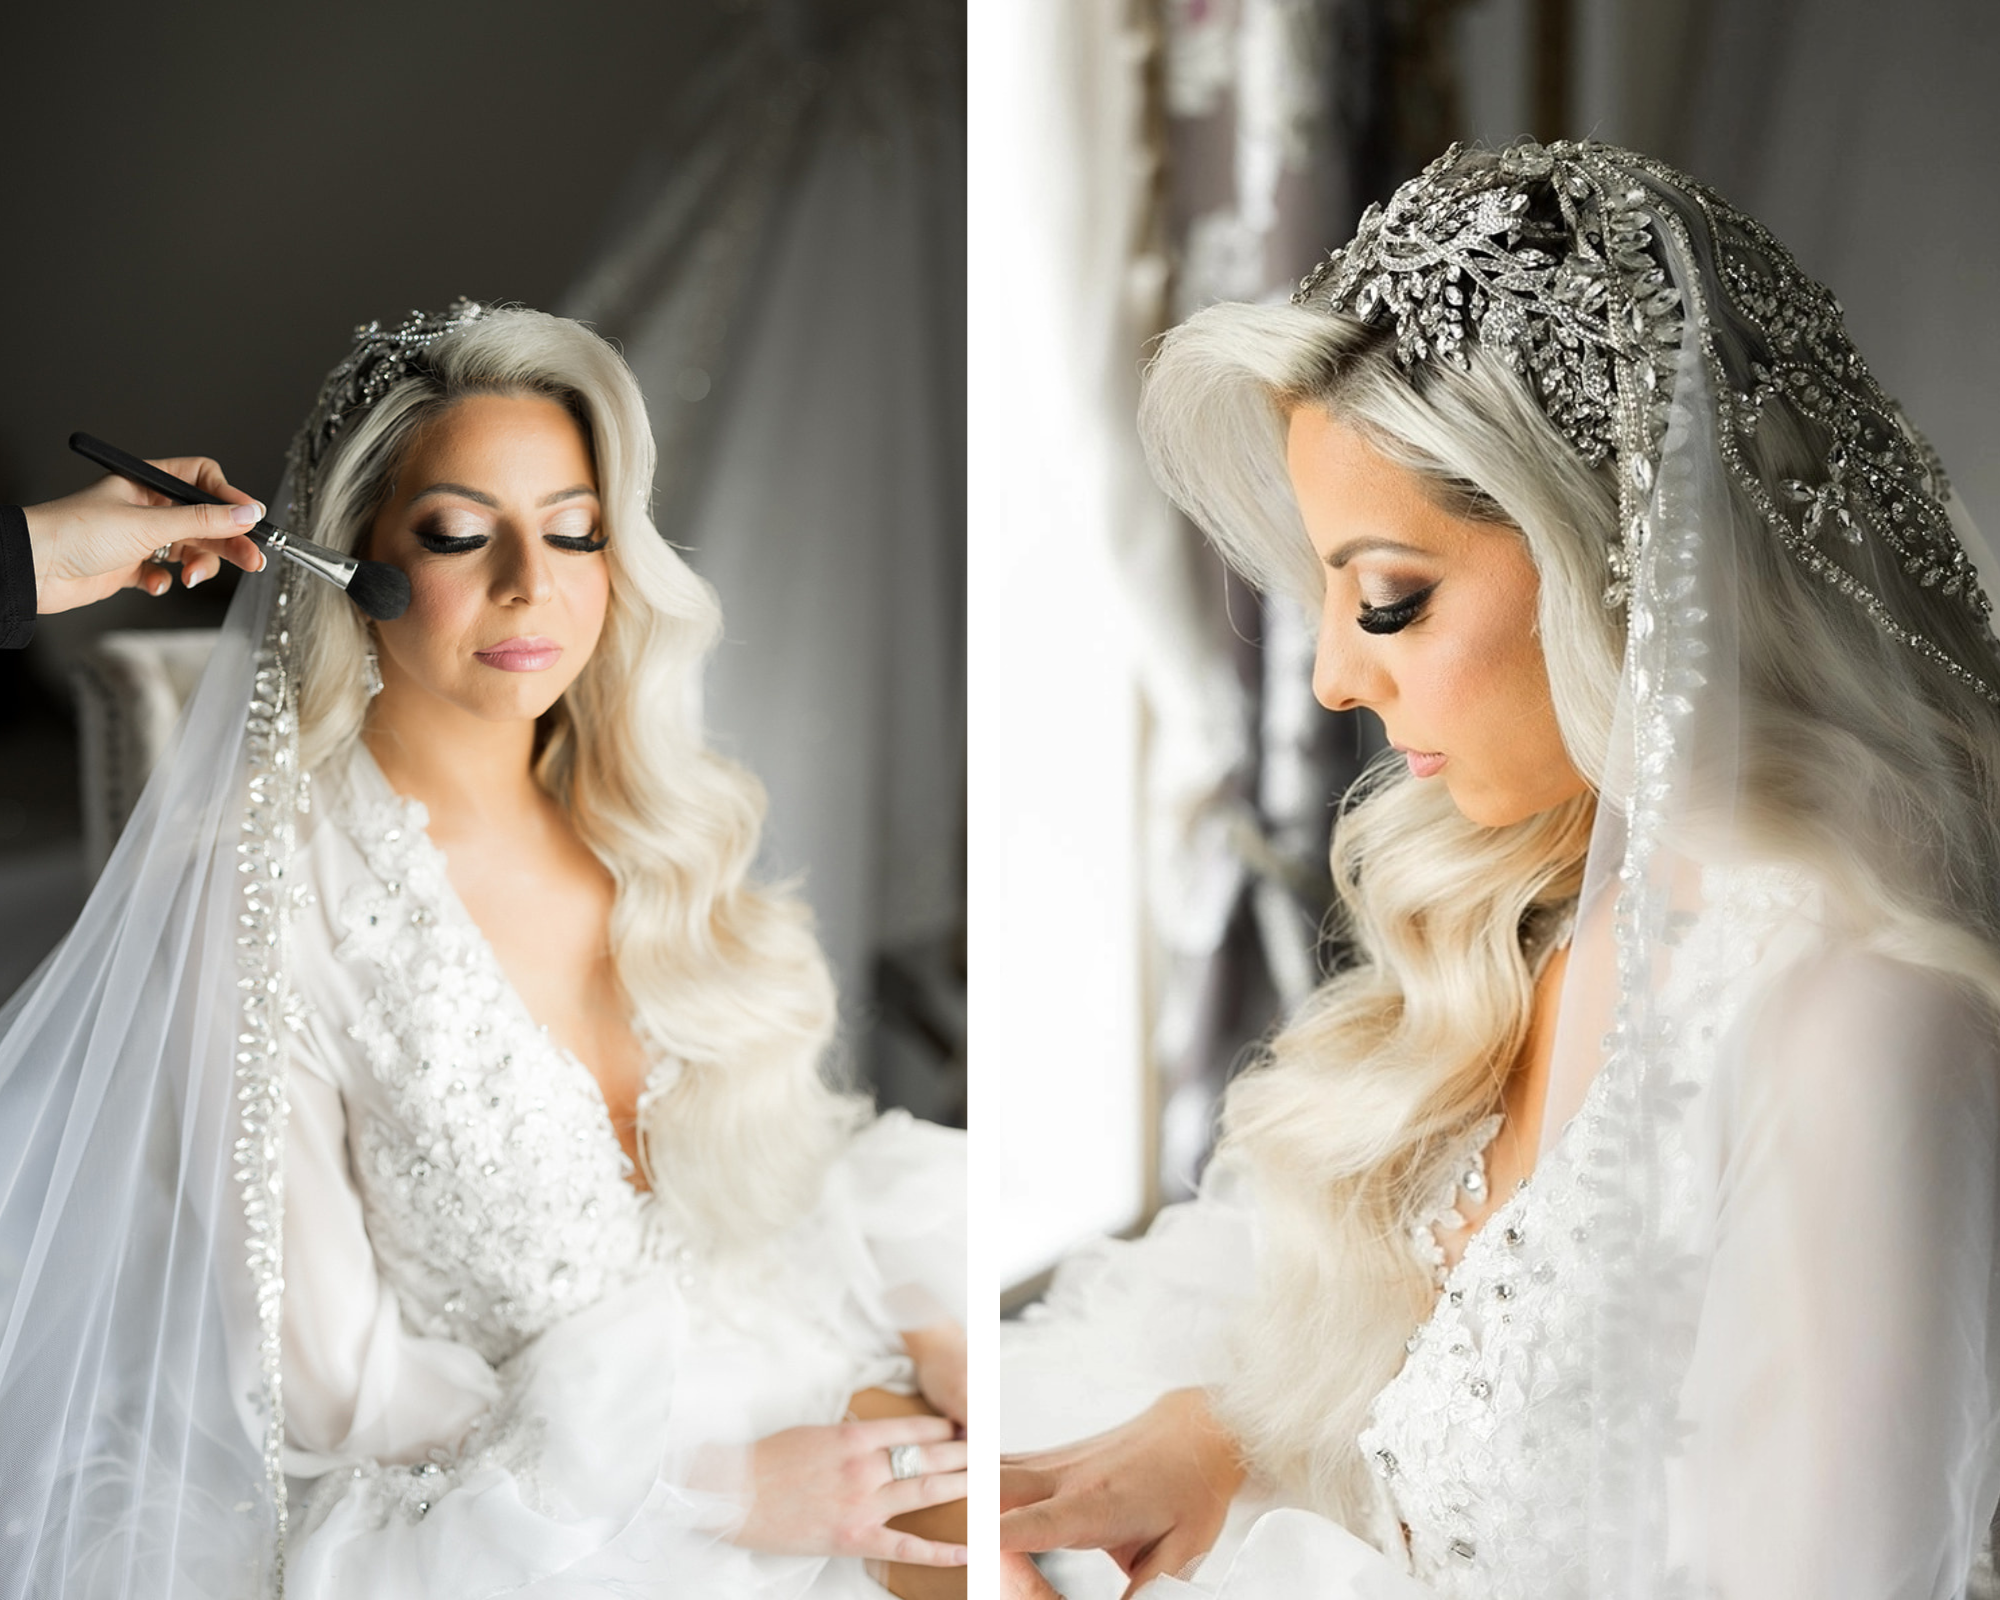 Real bride Sabrina getting ready for her big day. Her blond hair is down and accented by a Swarovski crystal bridal headband and ornate veil.